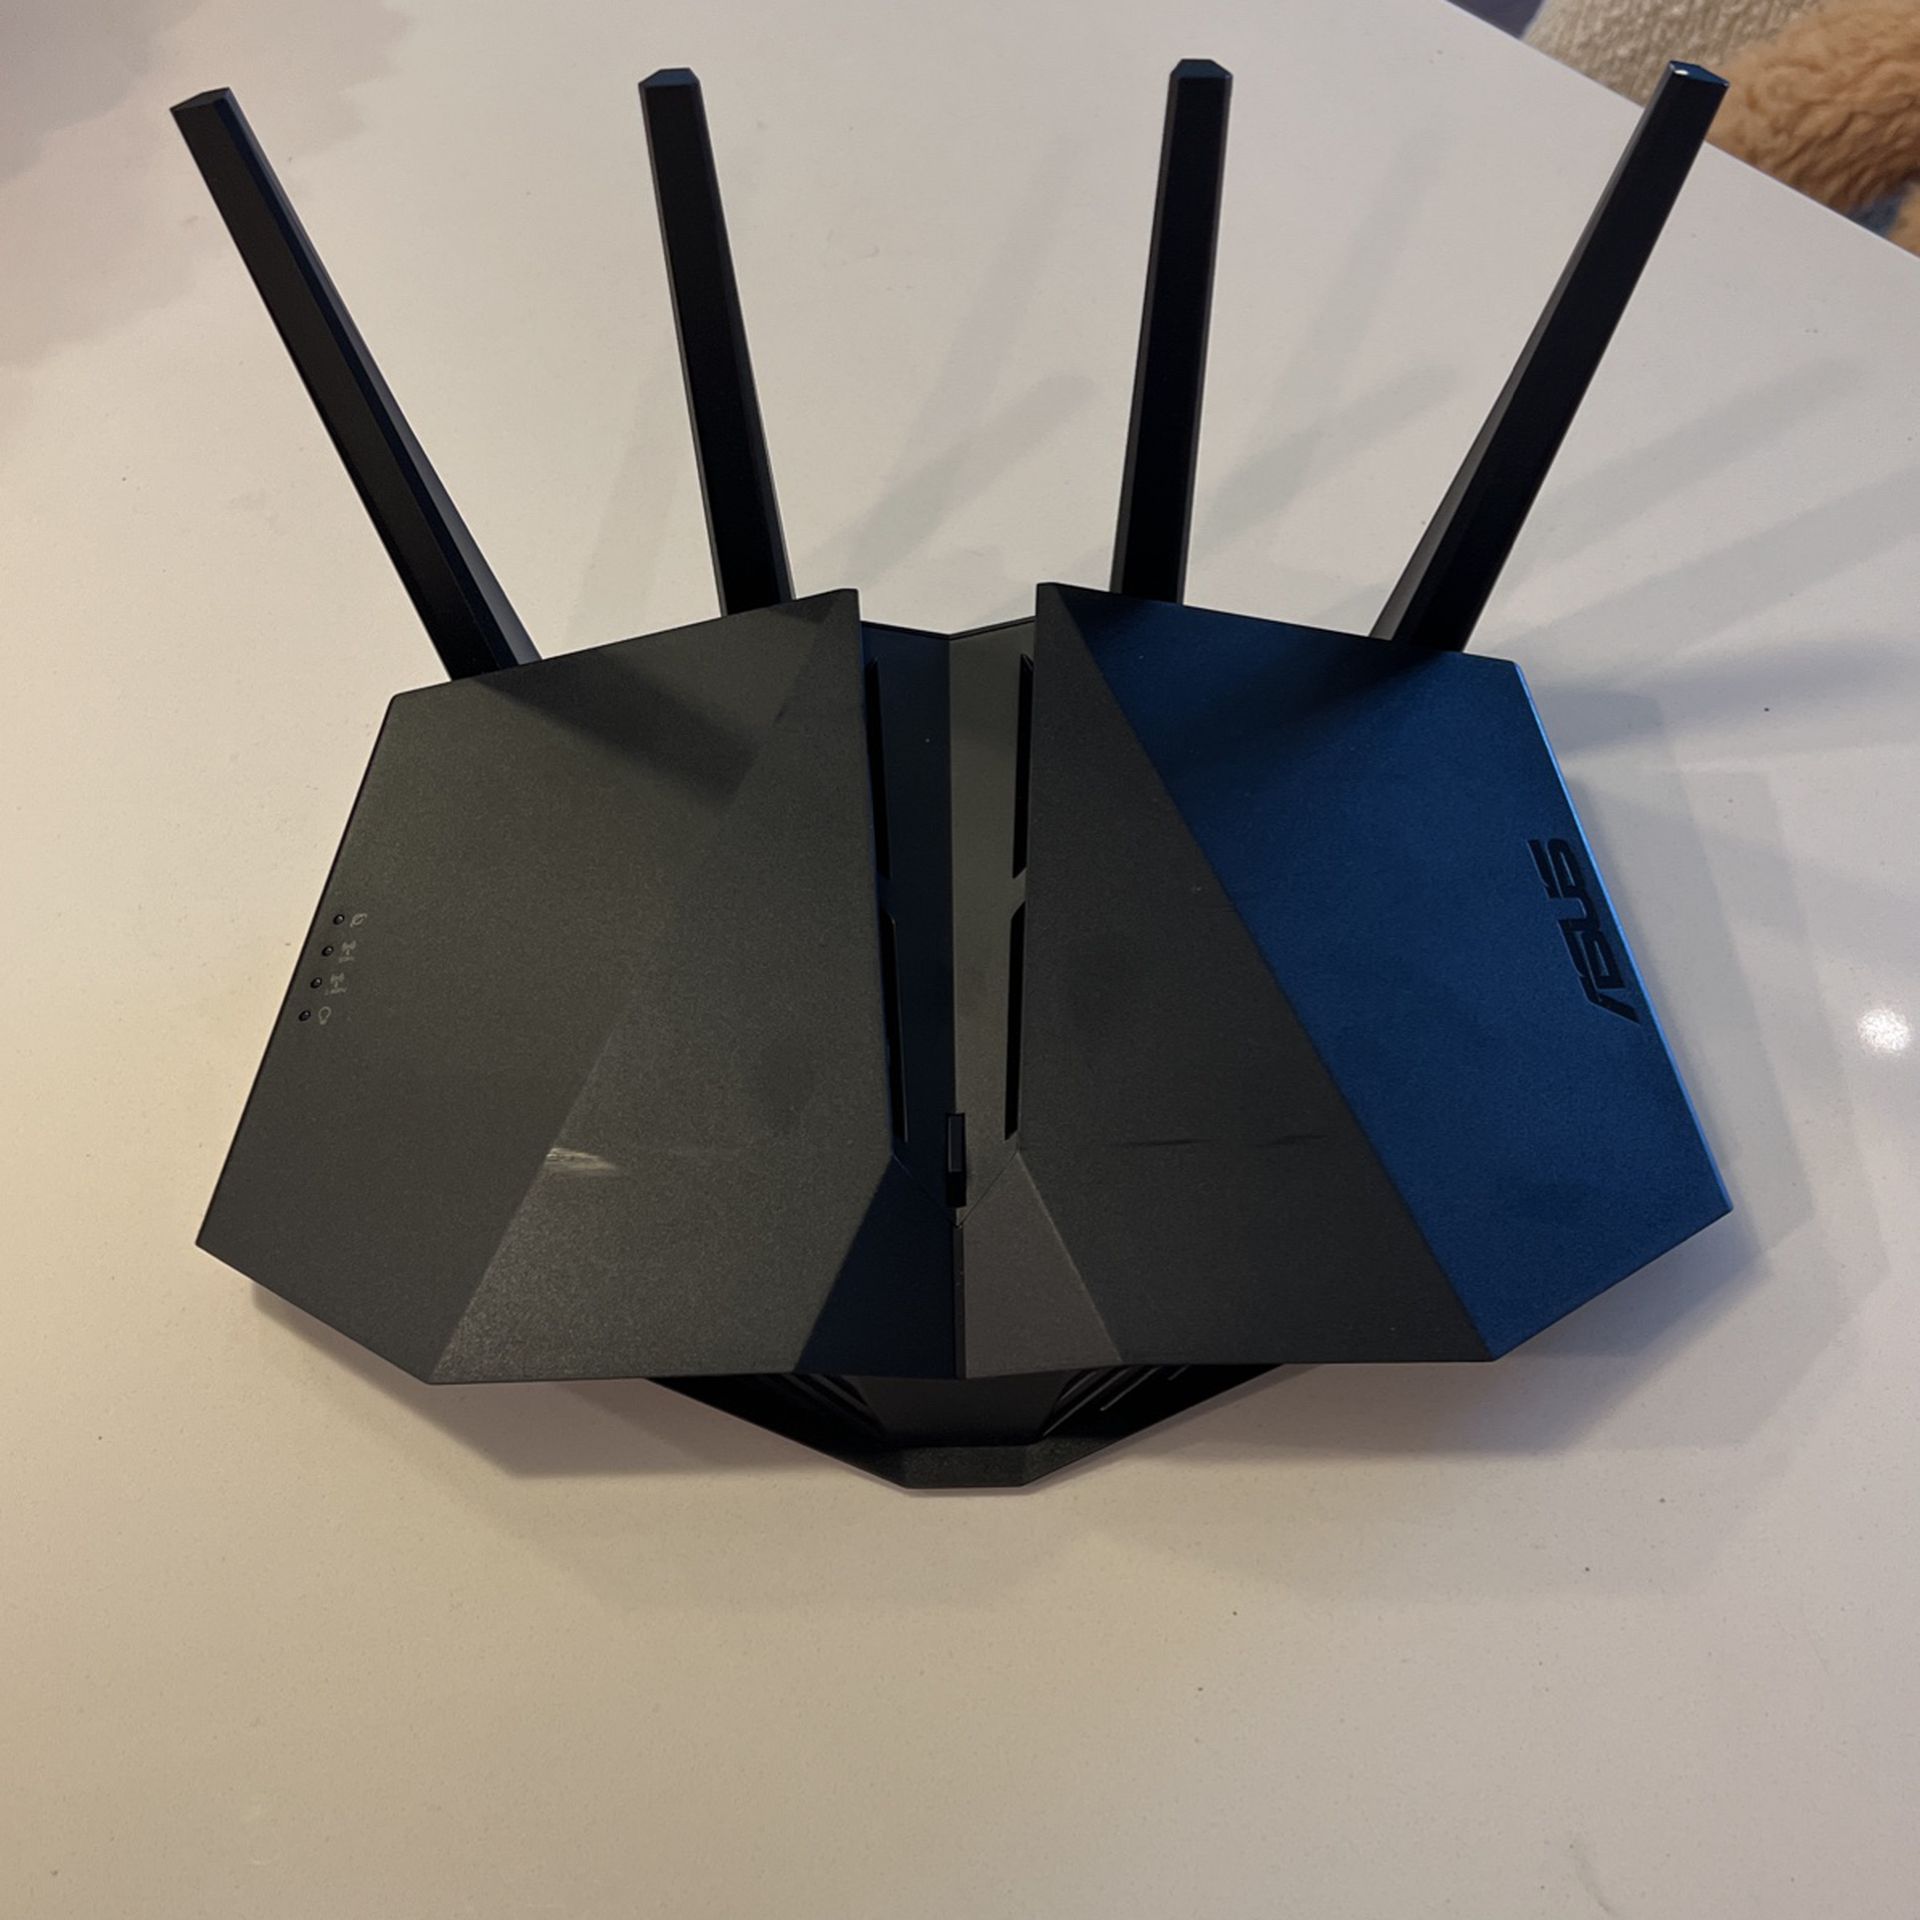 Asus Ax5400 Dual Band WiFi Router